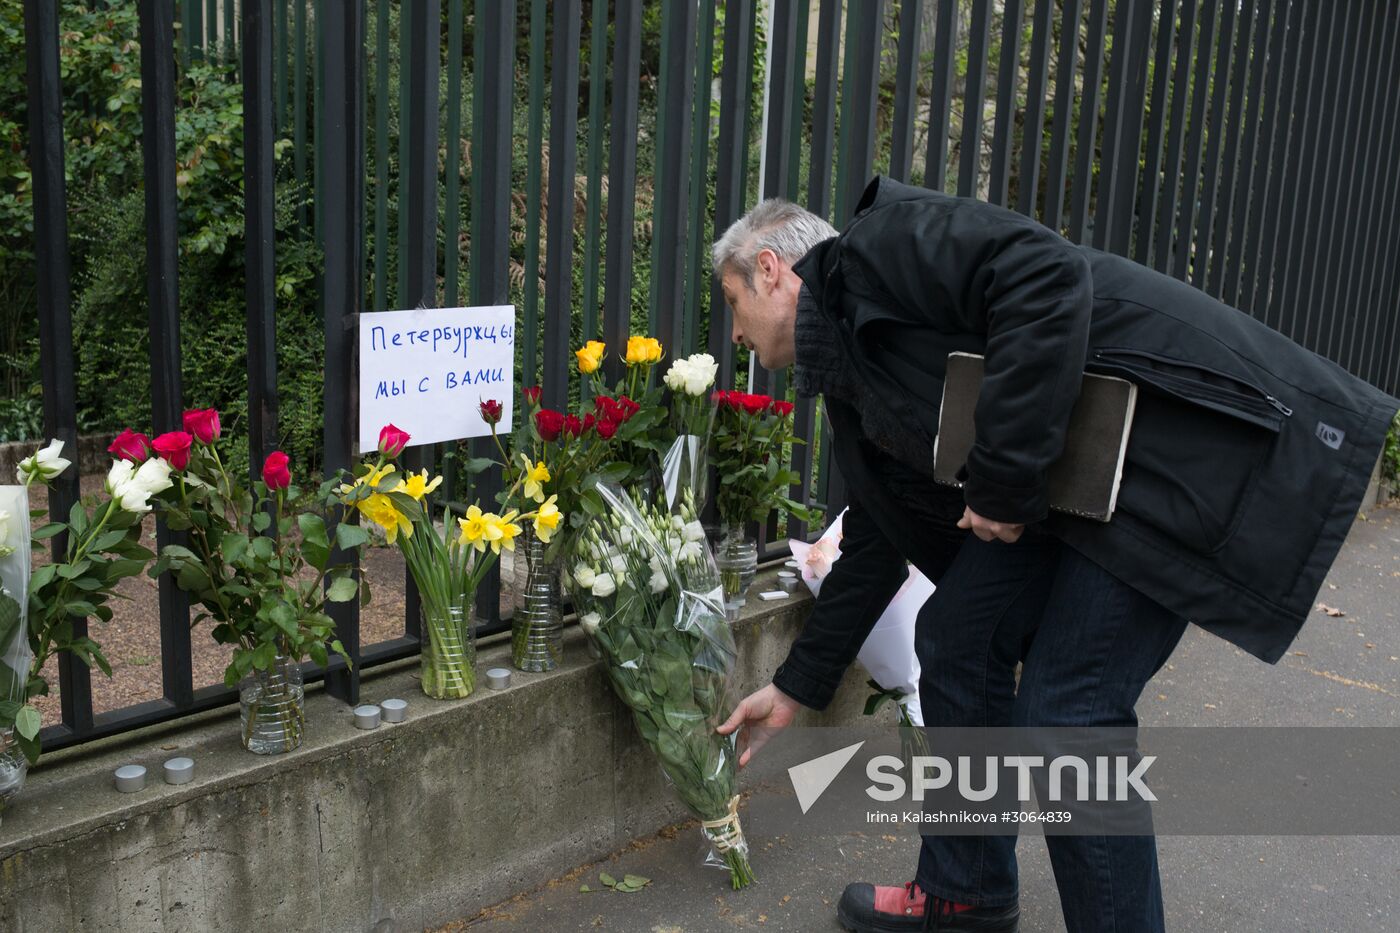 Foreign countries express solidarity with Russia following St. Petersburg metro bombing